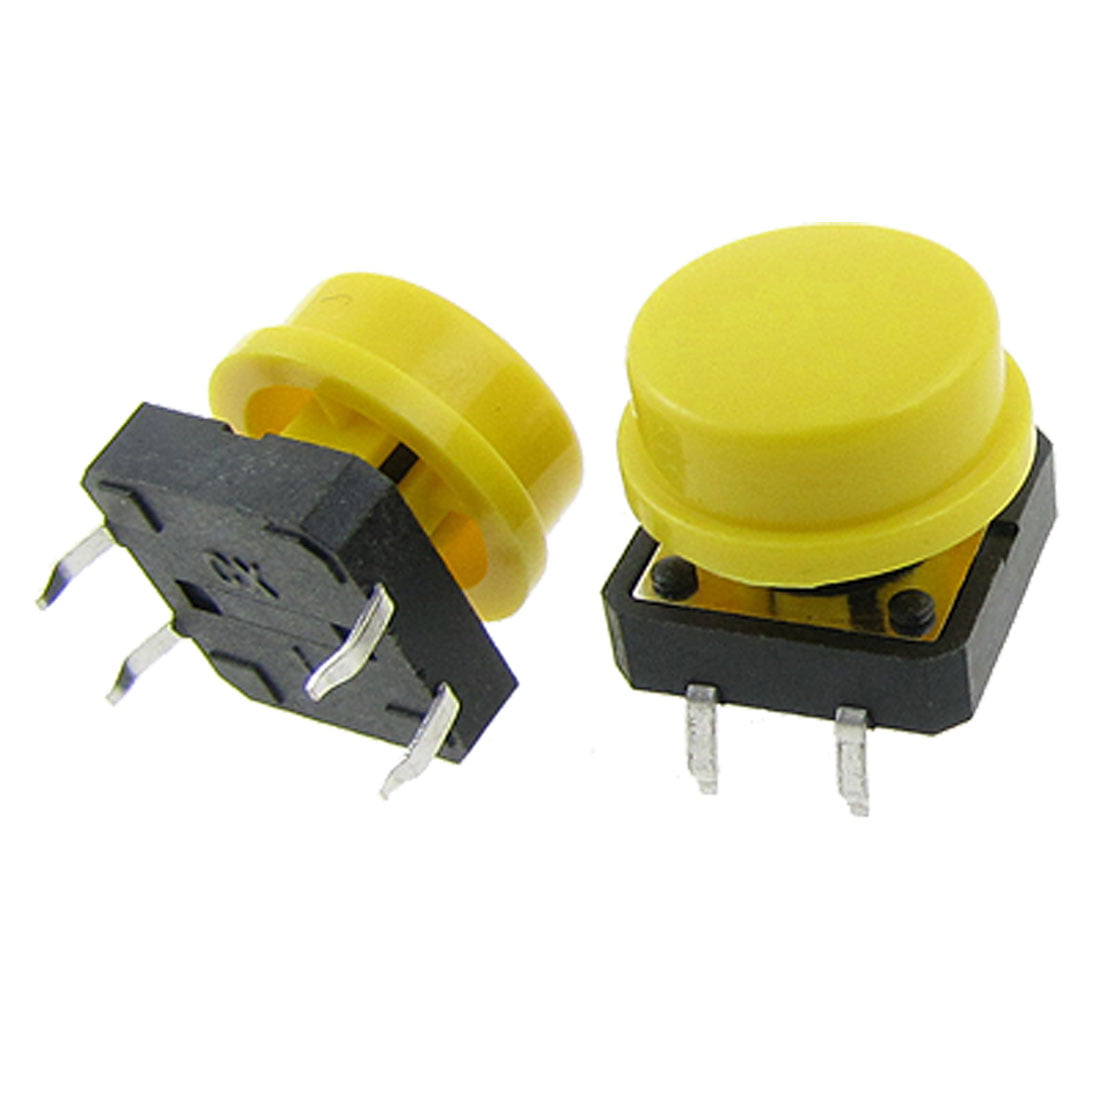 12x Waterproof Momentary ON OFF Yellow Push Switch Button /Car 